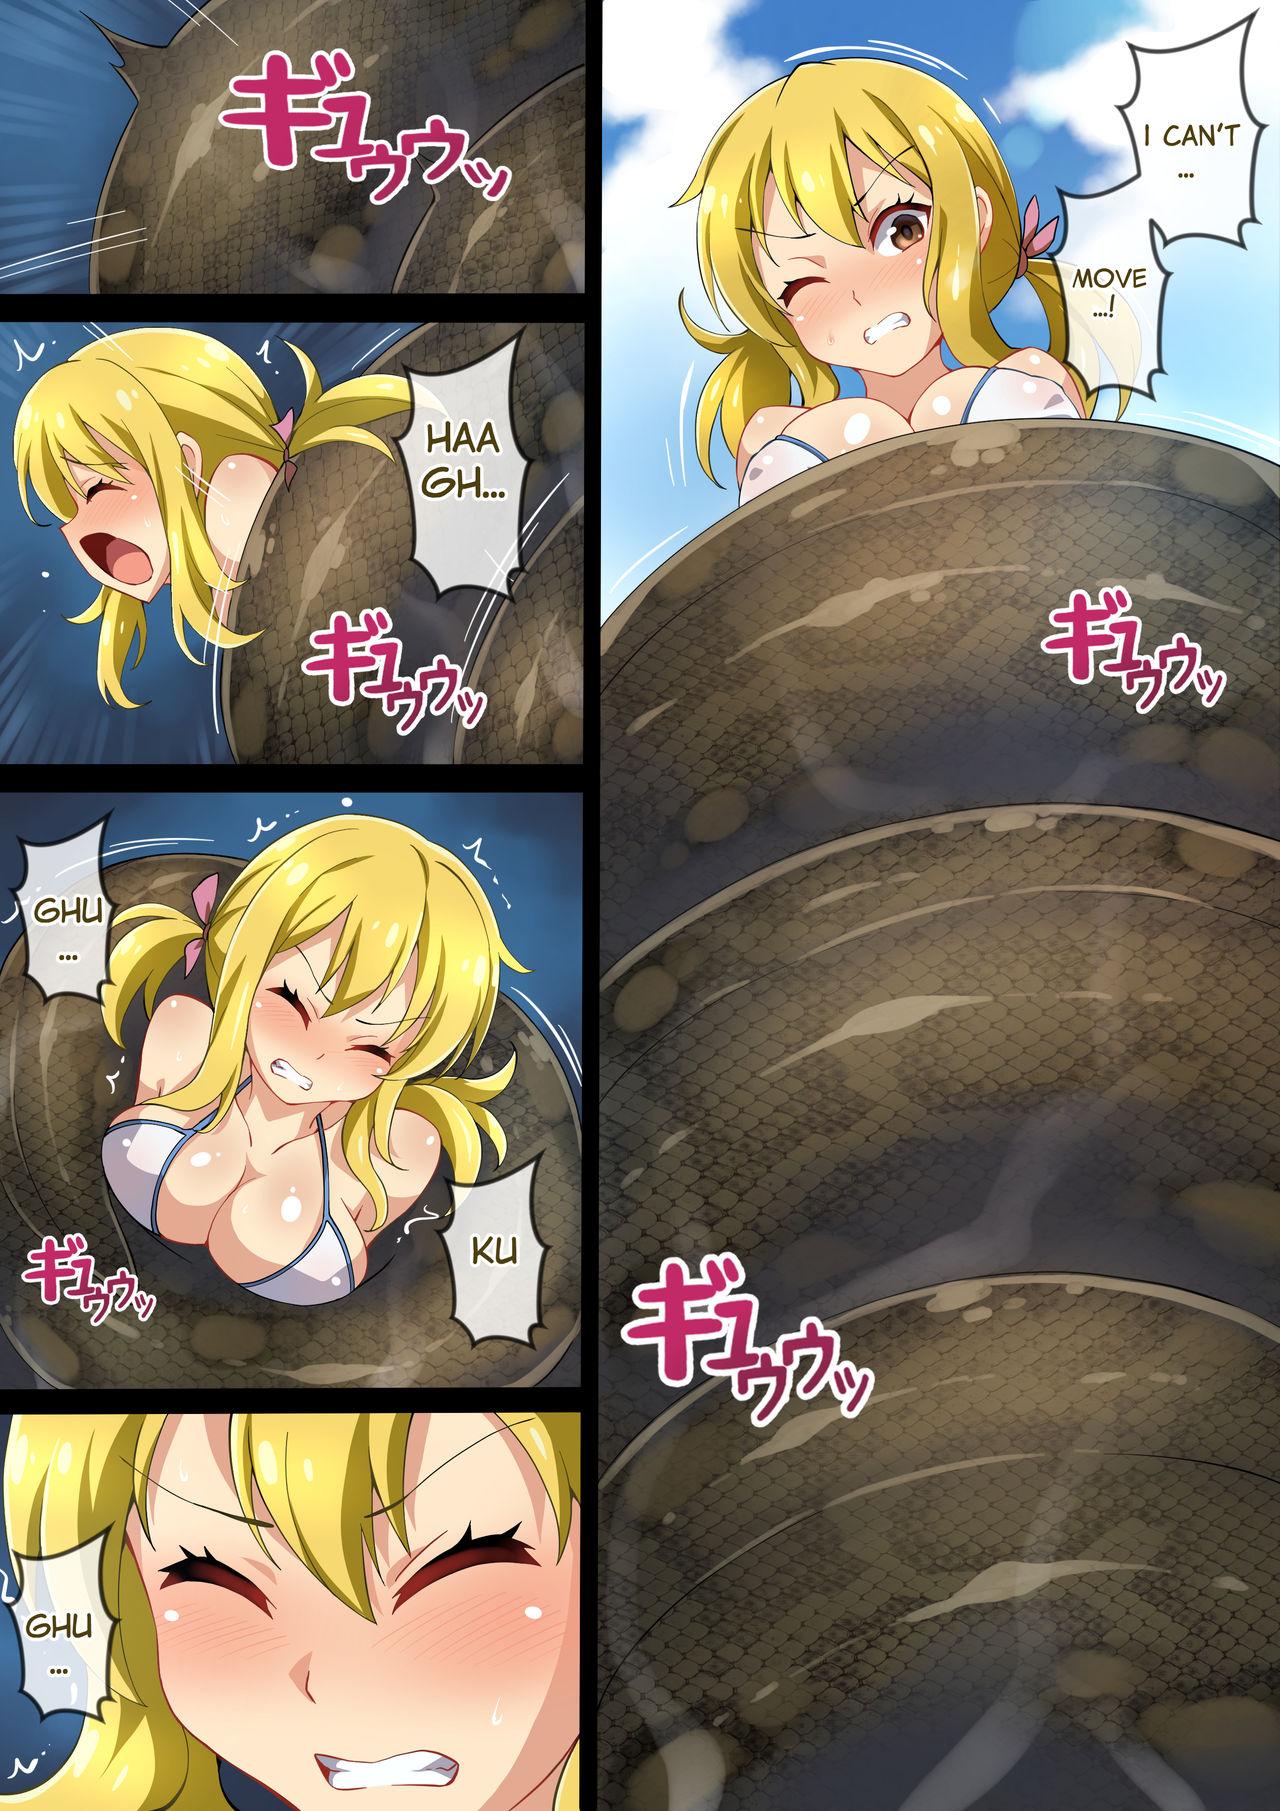 Jerking Off Hell of Swallowed Quest Fail Lucy - Fairy tail Young - Page 5